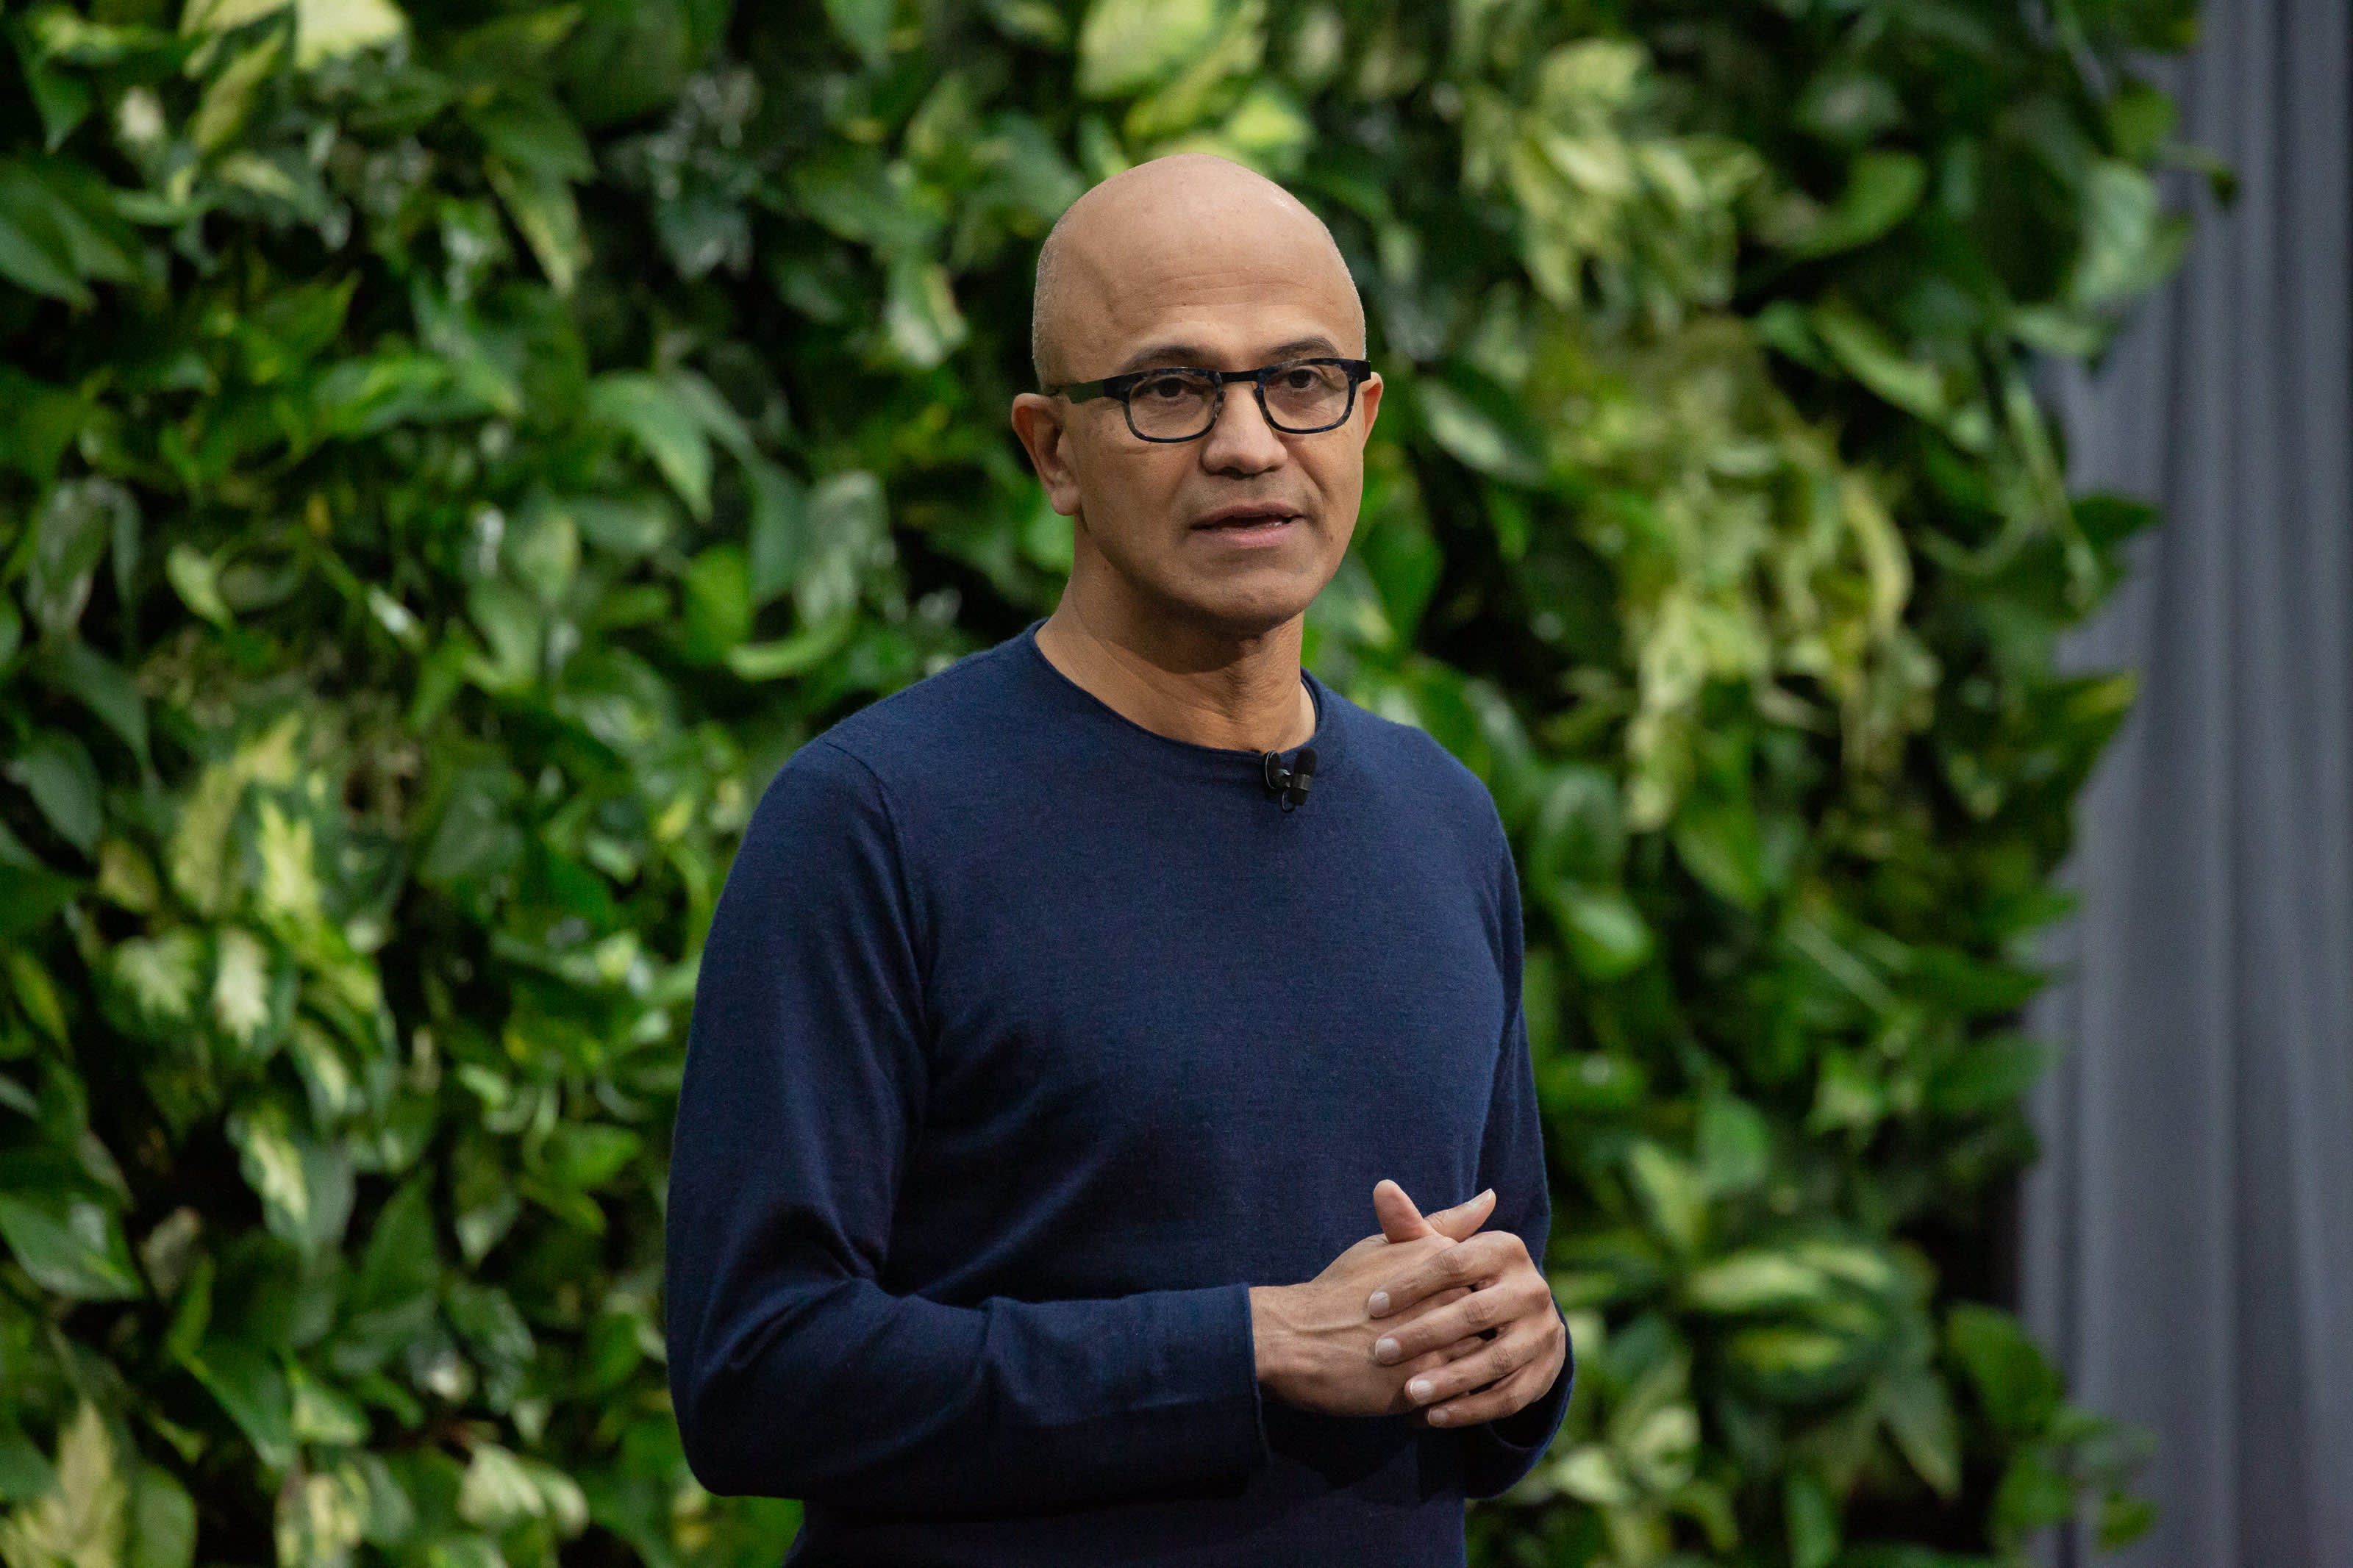 Capitalism 'will fundamentally be in jeopardy' if business does not act on climate change, Microsoft CEO Satya Nadella says - CNBC